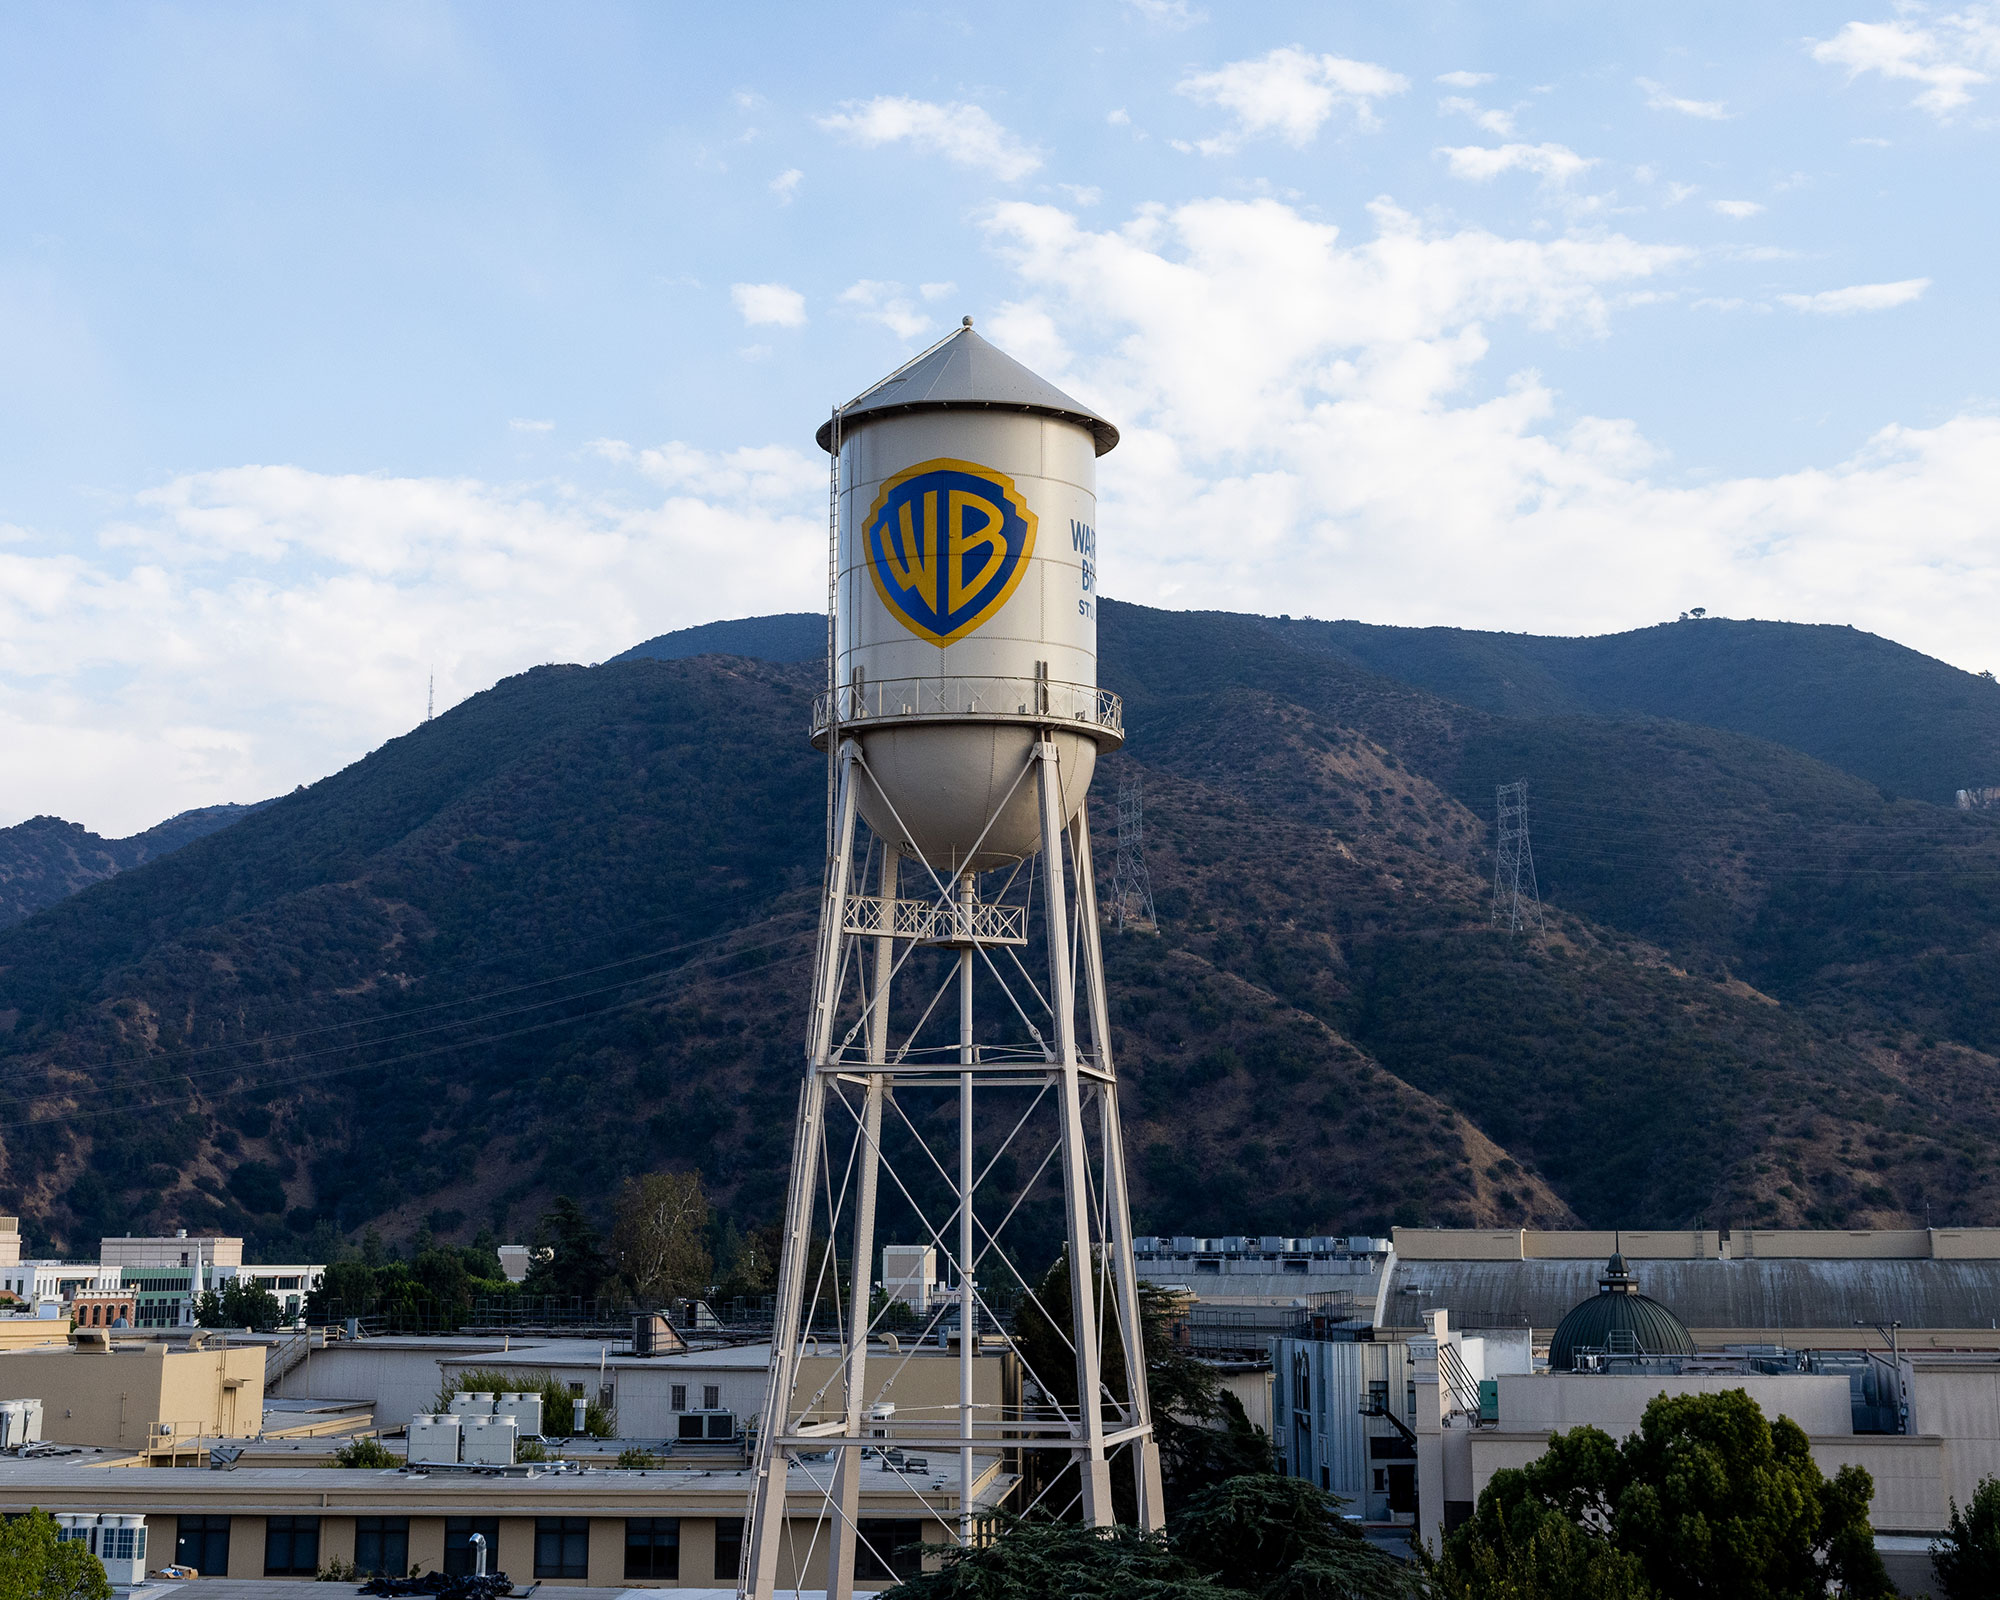 Photo of the WBD water tower on the lot in Burbank, California